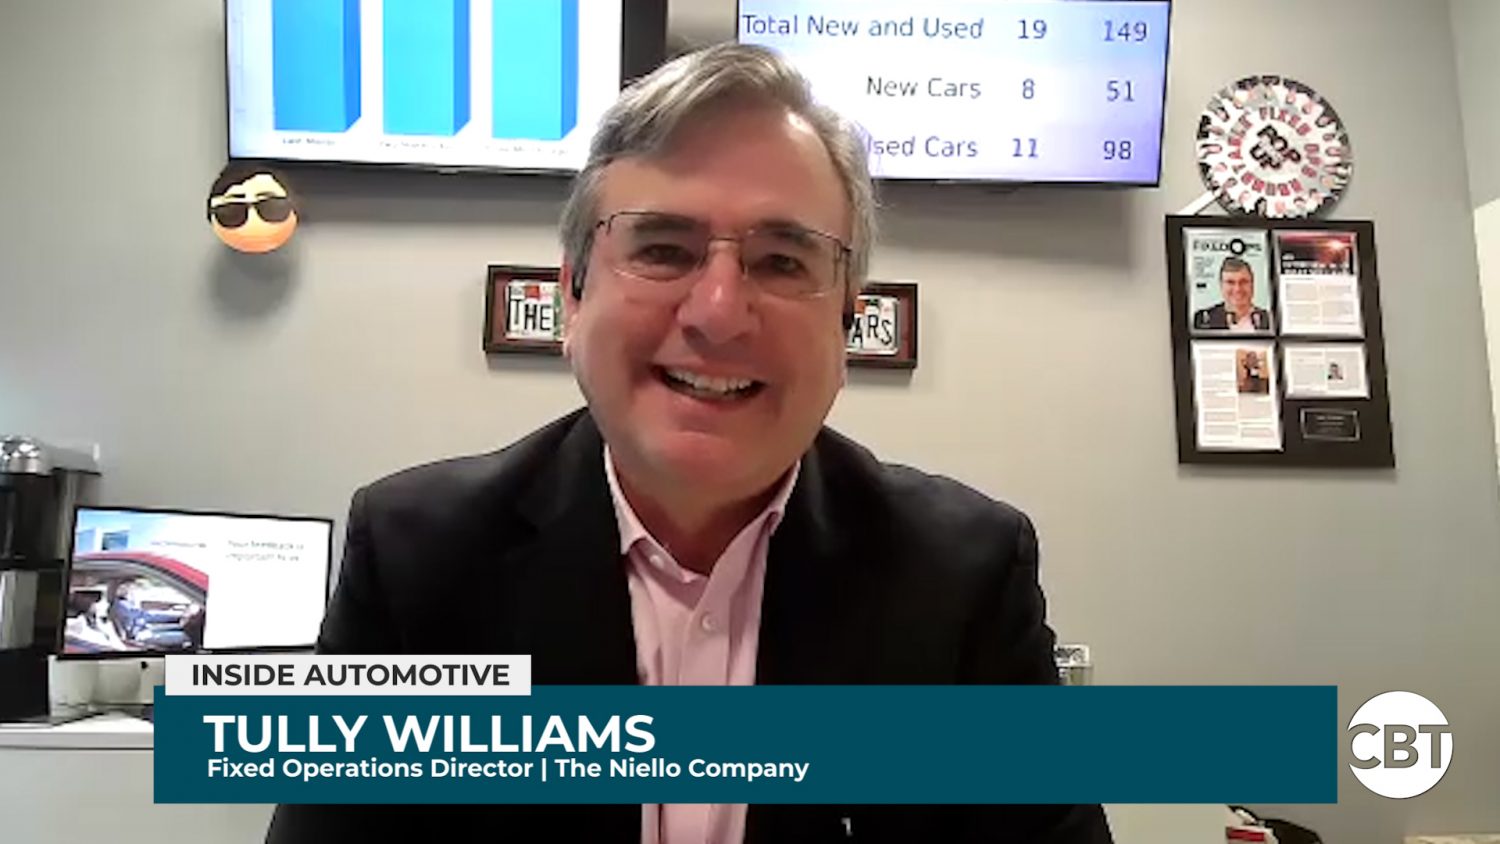 In today's episode of Inside Automotive, we're discussing retention with Tully Williams, the fixed operations director at The Niello Company.